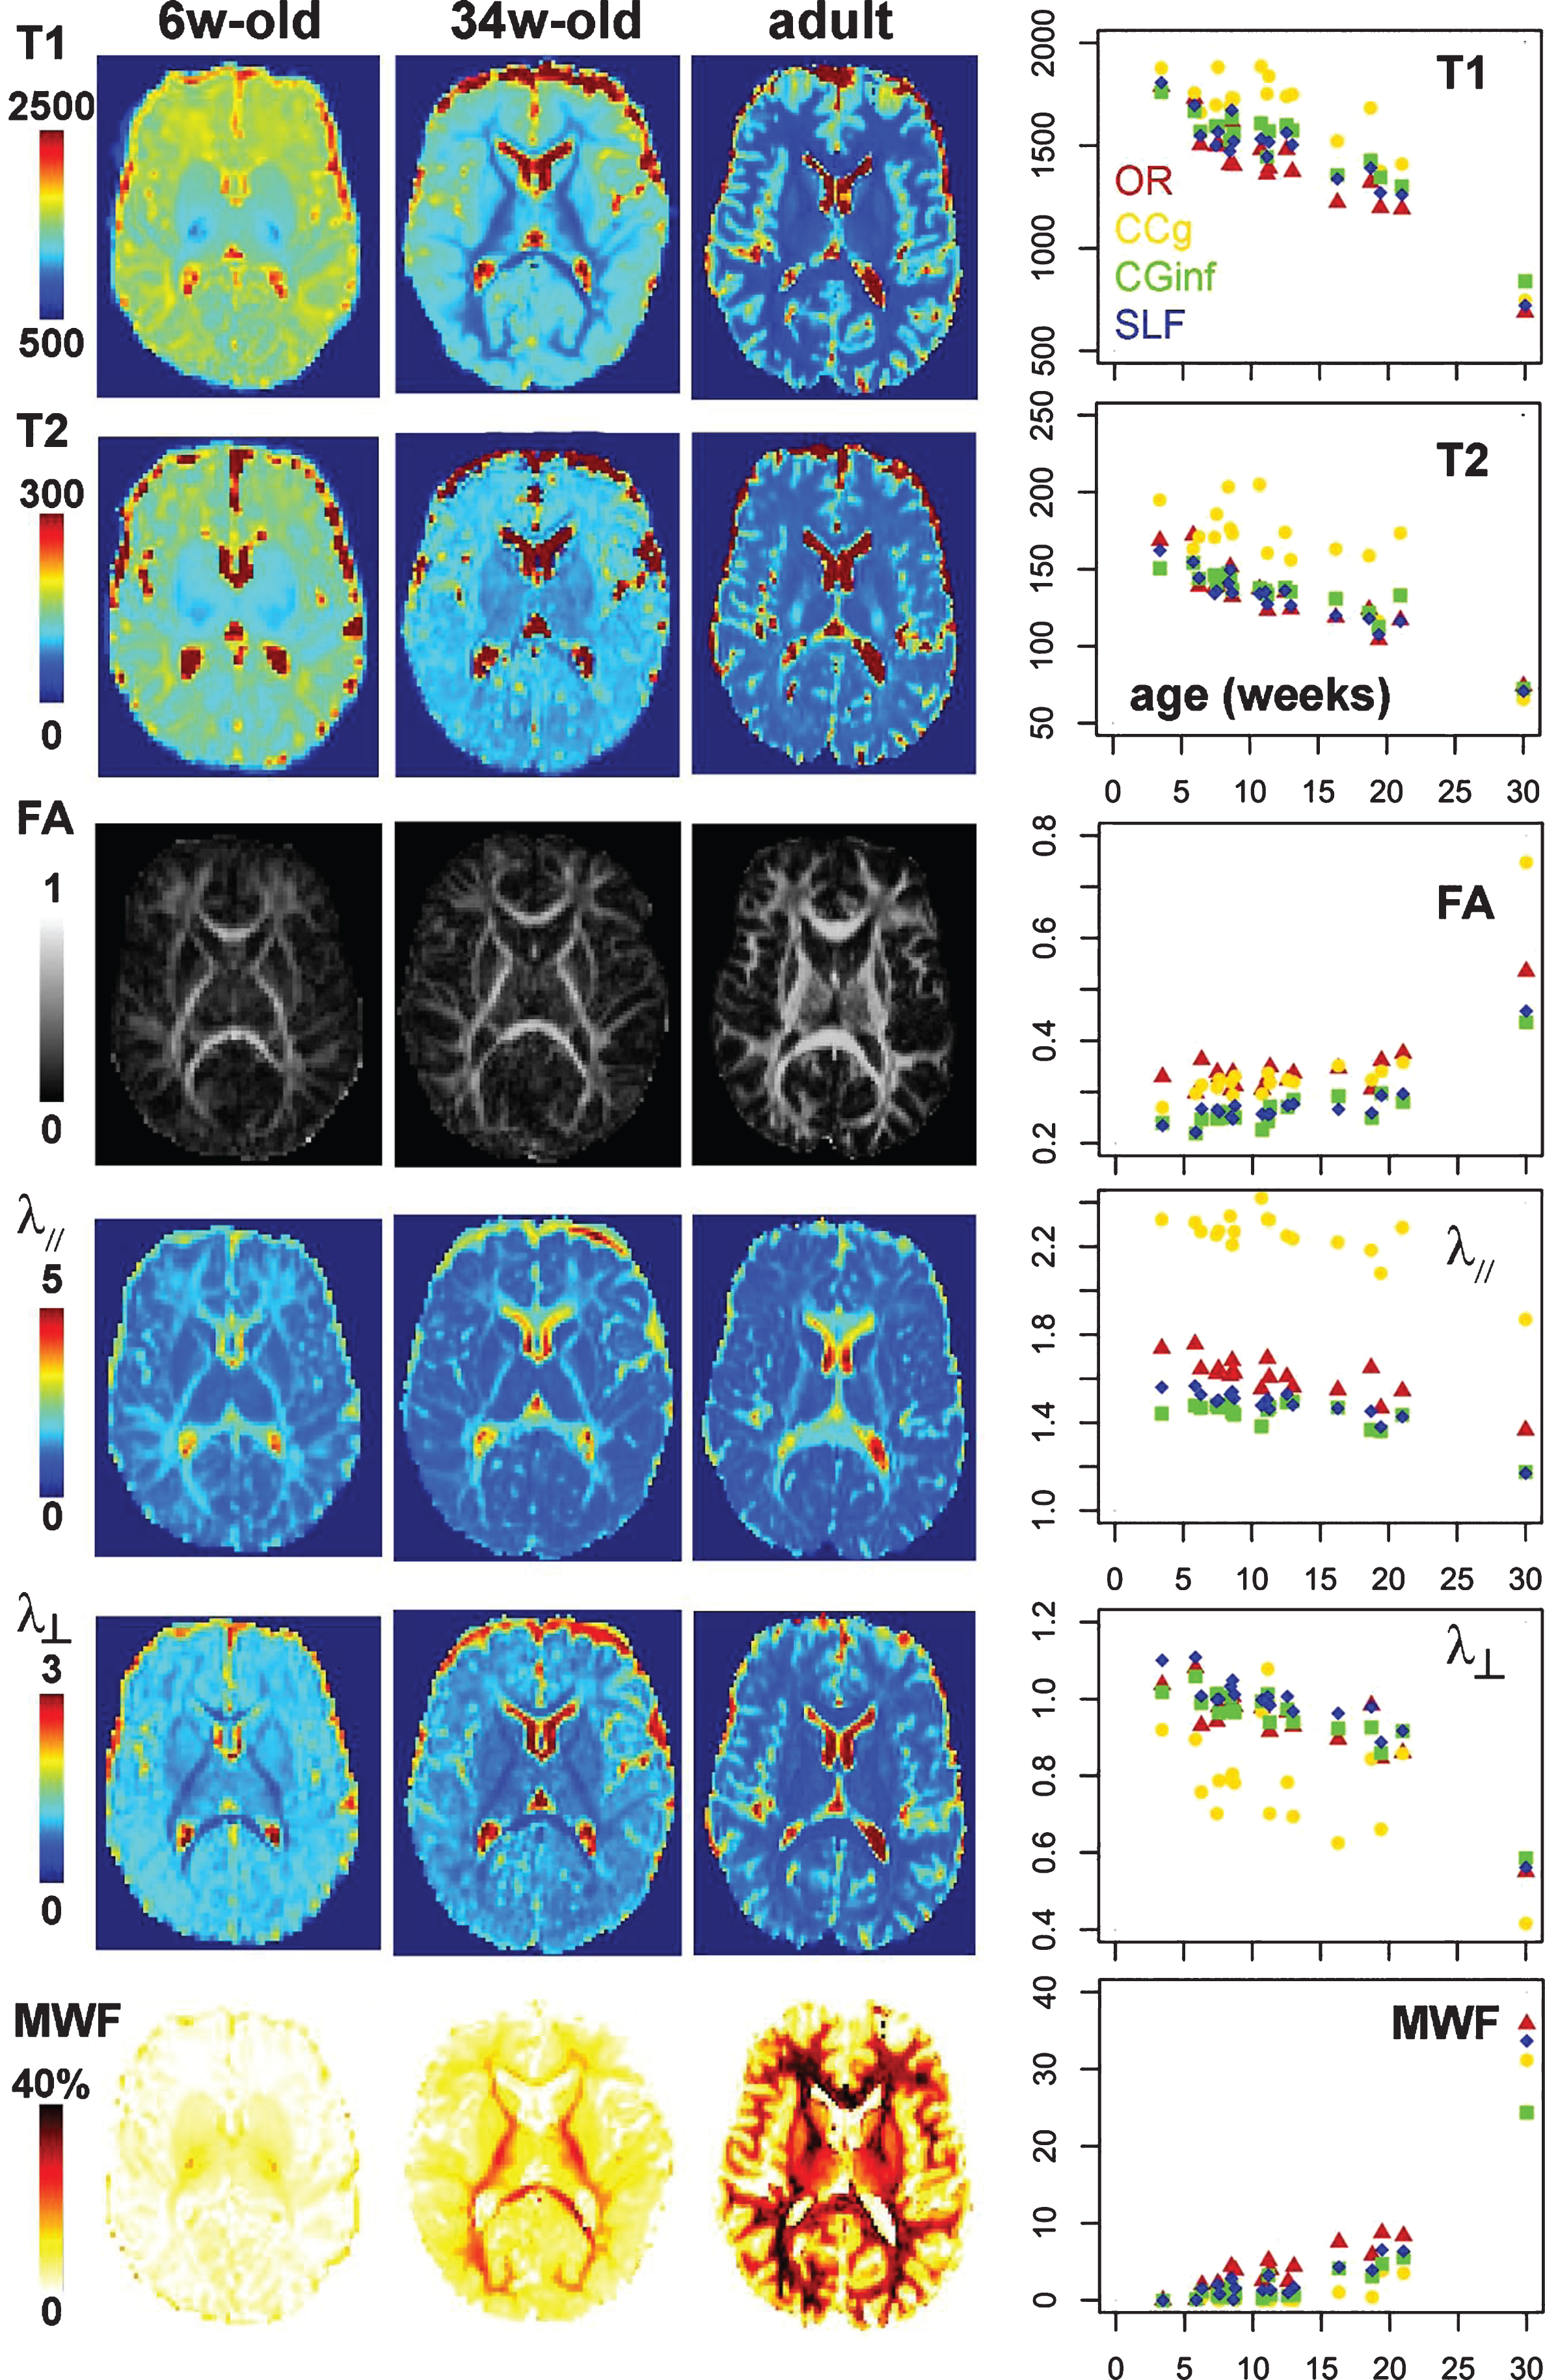 Asynchrony and spatial heterogeneity of maturation quantified with MRI parameters. Left rows: Maps of MRI parameters (a: T1, b: T2, c: DTI fractional anisotropy FA, d: longitudinal diffusivity λ//, e: transverse diffusivity λ⊥, f: myelin water fraction MWF) in a 6- and a 34-week-old infant, and a young adult. Right row: Age-related changes in MRI parameters over a group of 17 infants aged between 3 and 21 weeks, for the four white matter bundles shown in Fig. 1 (projection: optic radiations OR, commissural: genu of the corpus callosum CCg, limbic: inferior branch of the cingulum CGinf, association: superior longitudinal fasciculus SLF), suggesting different maturational calendar across bundles. The median values computed over a group of 13 young adults are also indicated on the right of the plots (arbitrary age of 30w). There is a high variability across bundles also at the mature stage particularly in terms of FA, λ// and MWF. For quantification on other bundles, one can refer to [40, 99].